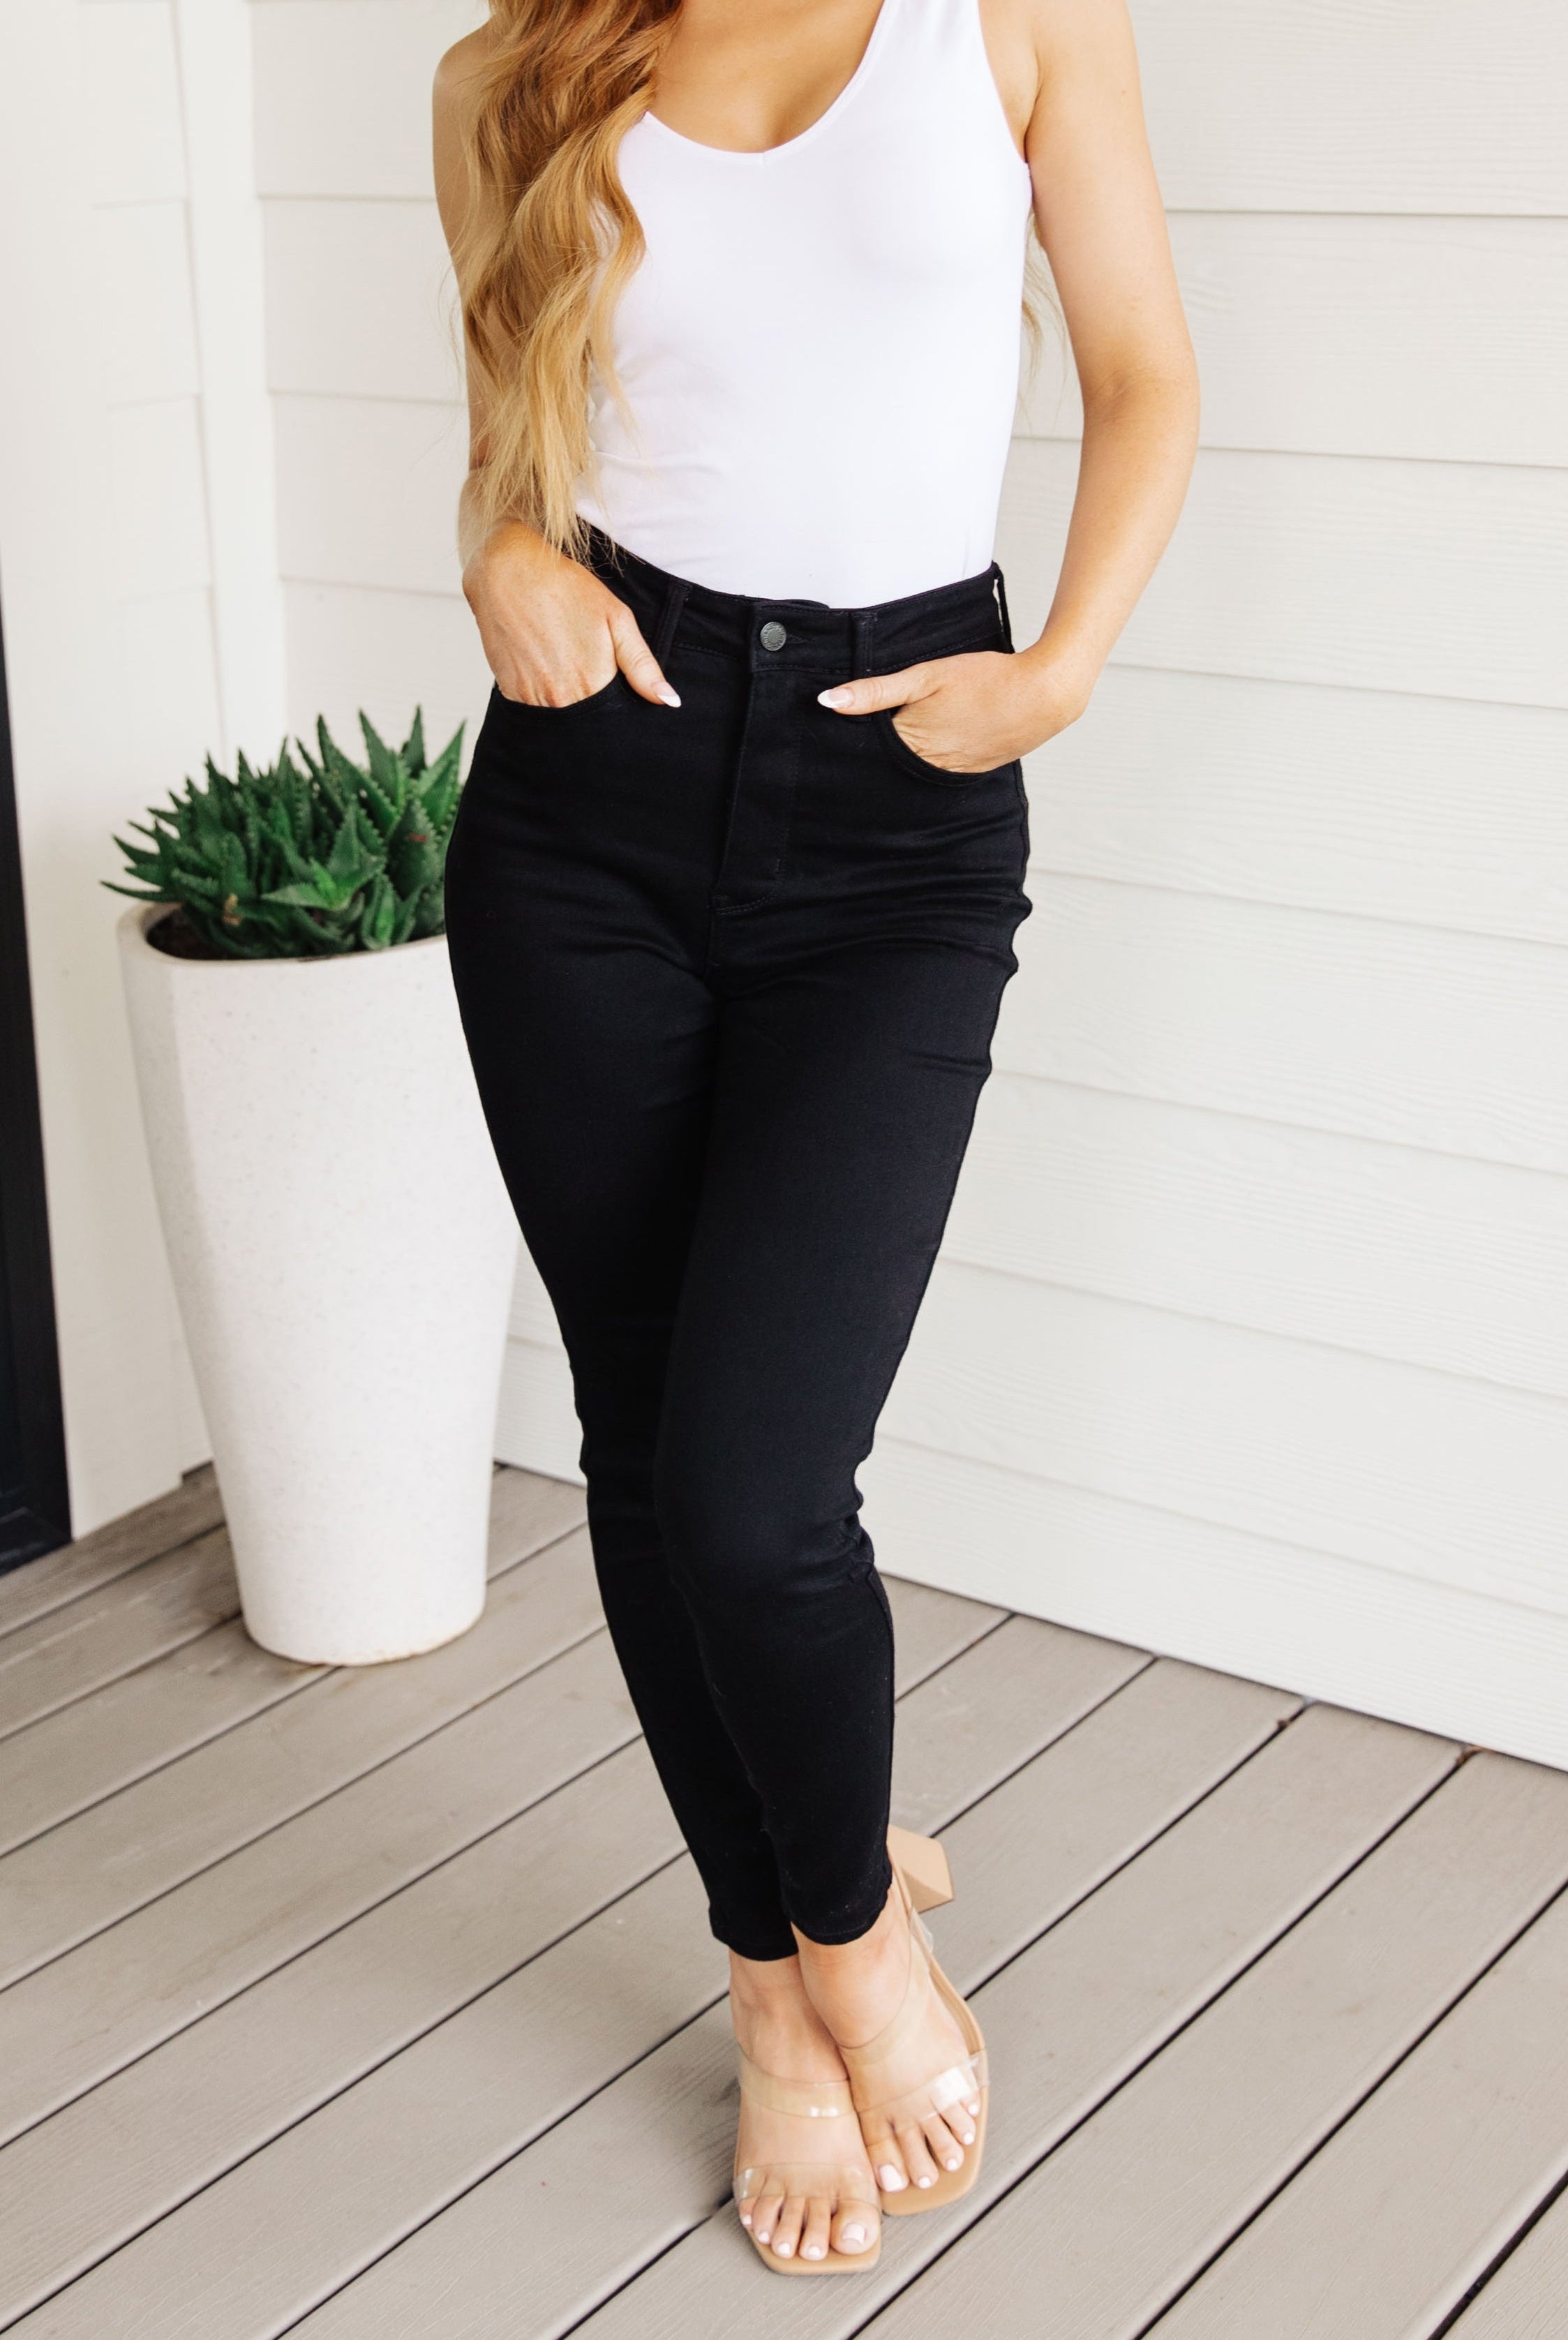 Judy Blue Audrey High Rise Control Top Classic Skinny Jeans in Black-Jeans-Krush Kandy, Women's Online Fashion Boutique Located in Phoenix, Arizona (Scottsdale Area)